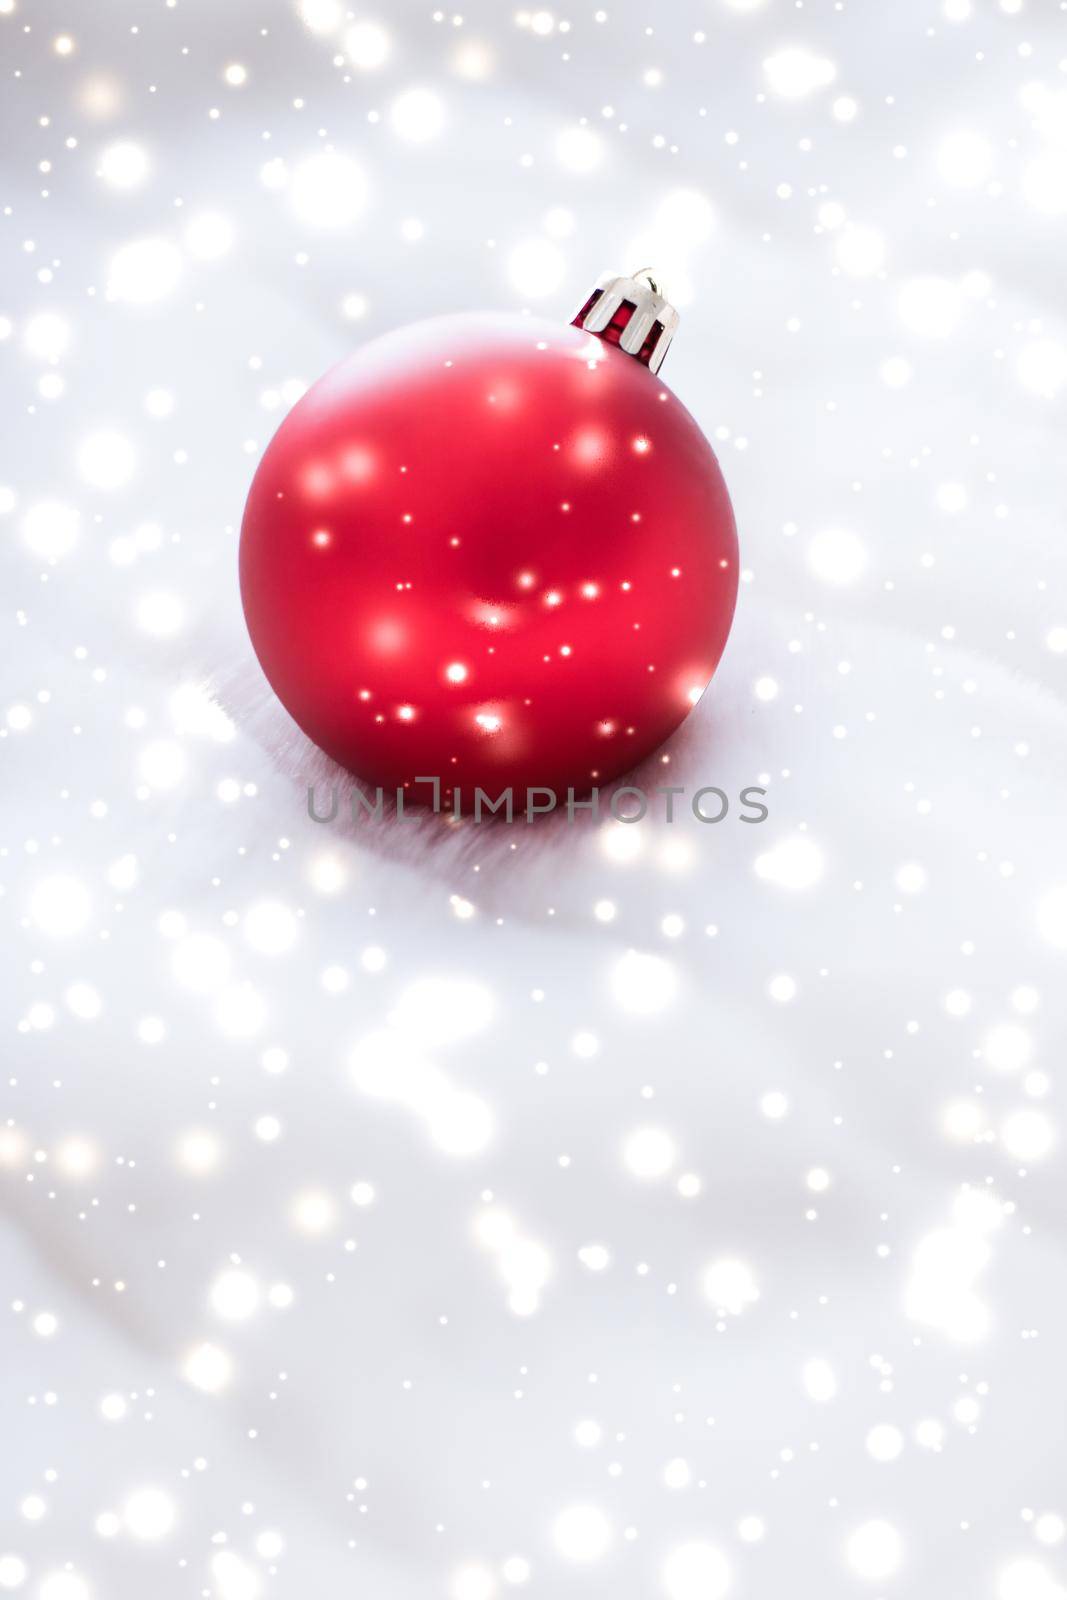 Gift decor, New Years Eve and happy celebration concept - Red Christmas baubles on fluffy fur with snow glitter, luxury winter holiday design background